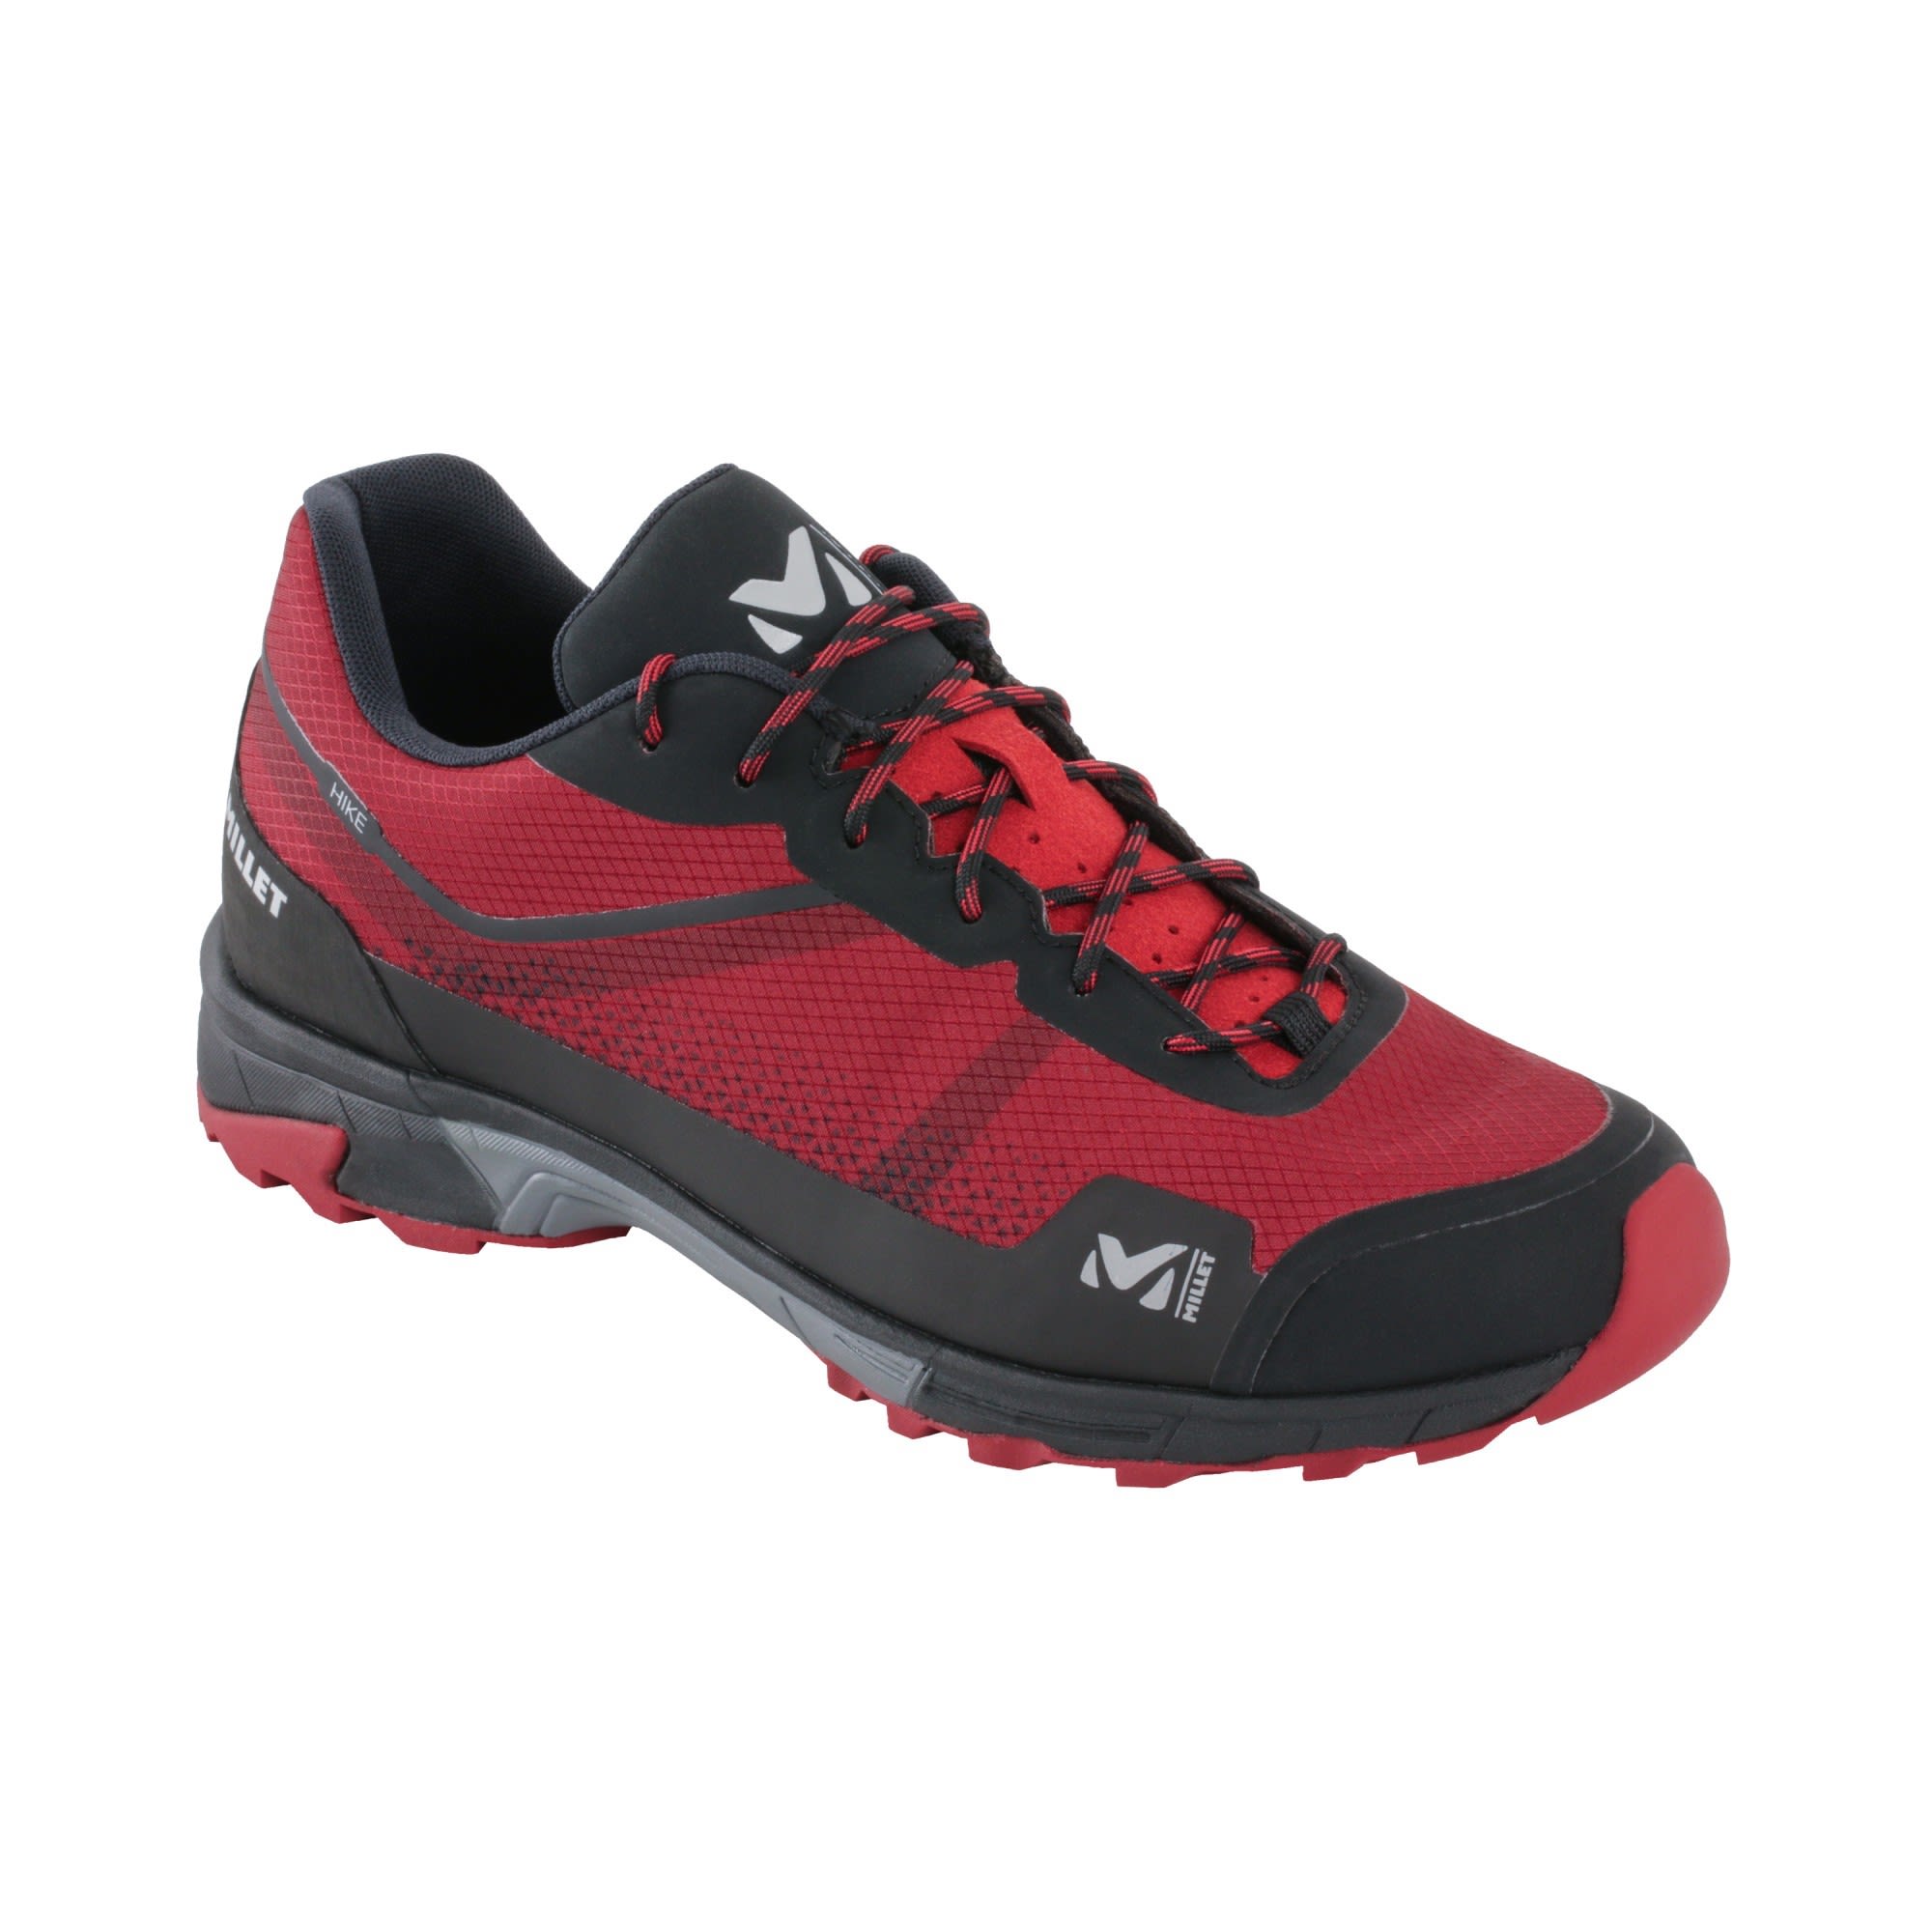 Millet Hike Rot- Male Hiking- und Approach-Schuhe- Grsse EU 45 1-3 - Farbe Red - Rouge unter Millet